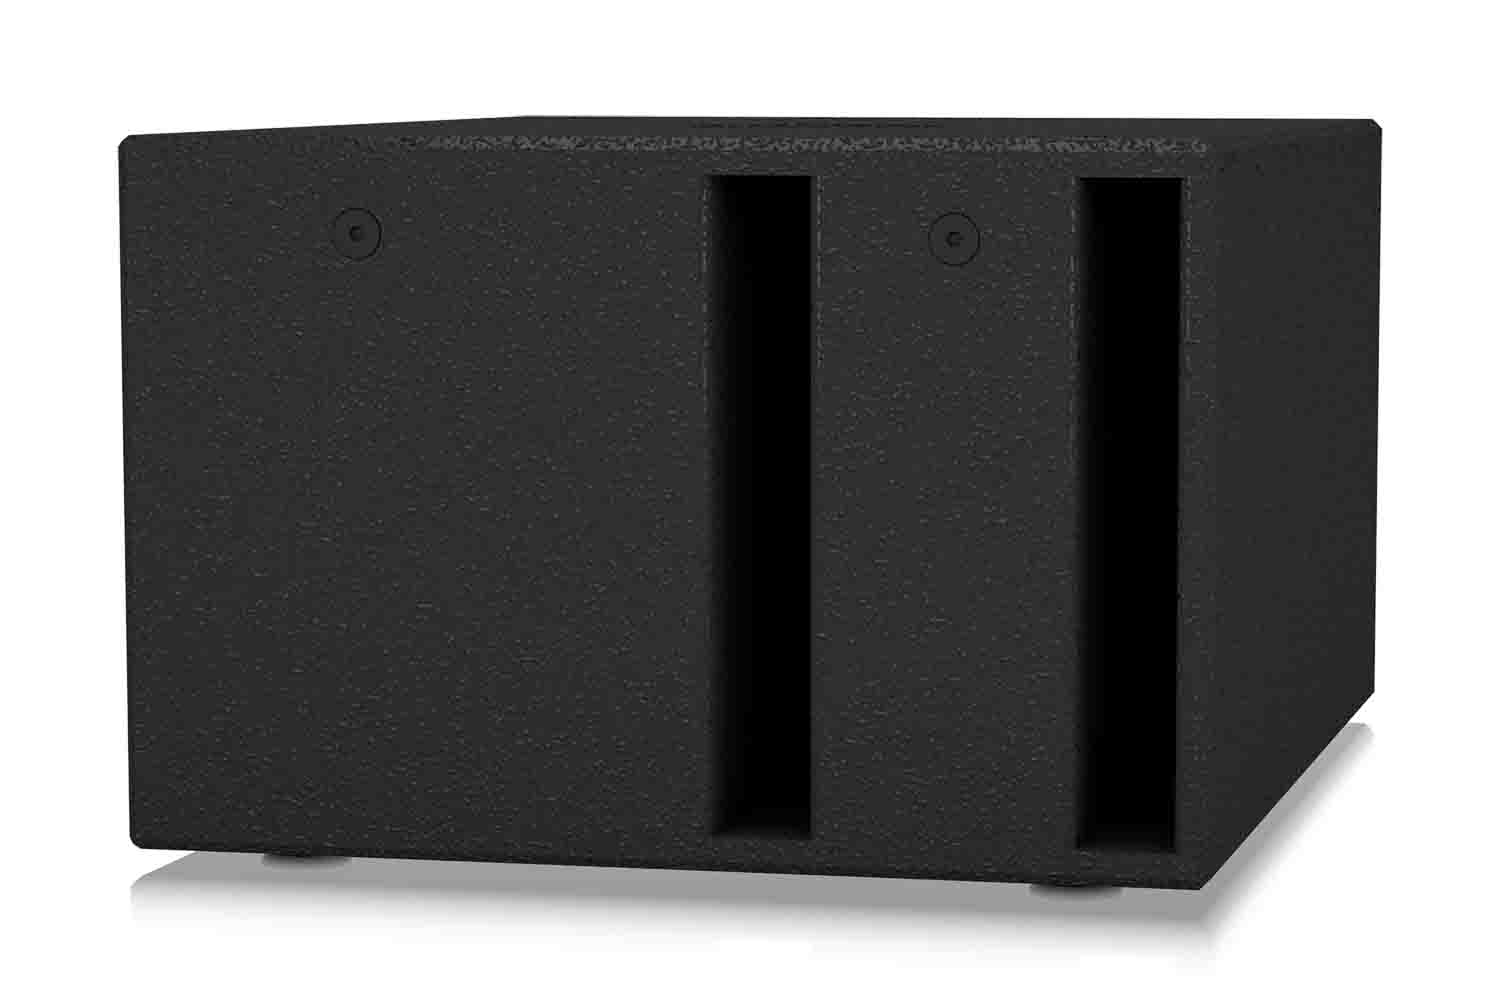 Tannoy VSX 10BP, 10-Inch Compact Band-Pass Passive Subwoofer - Black - Hollywood DJ